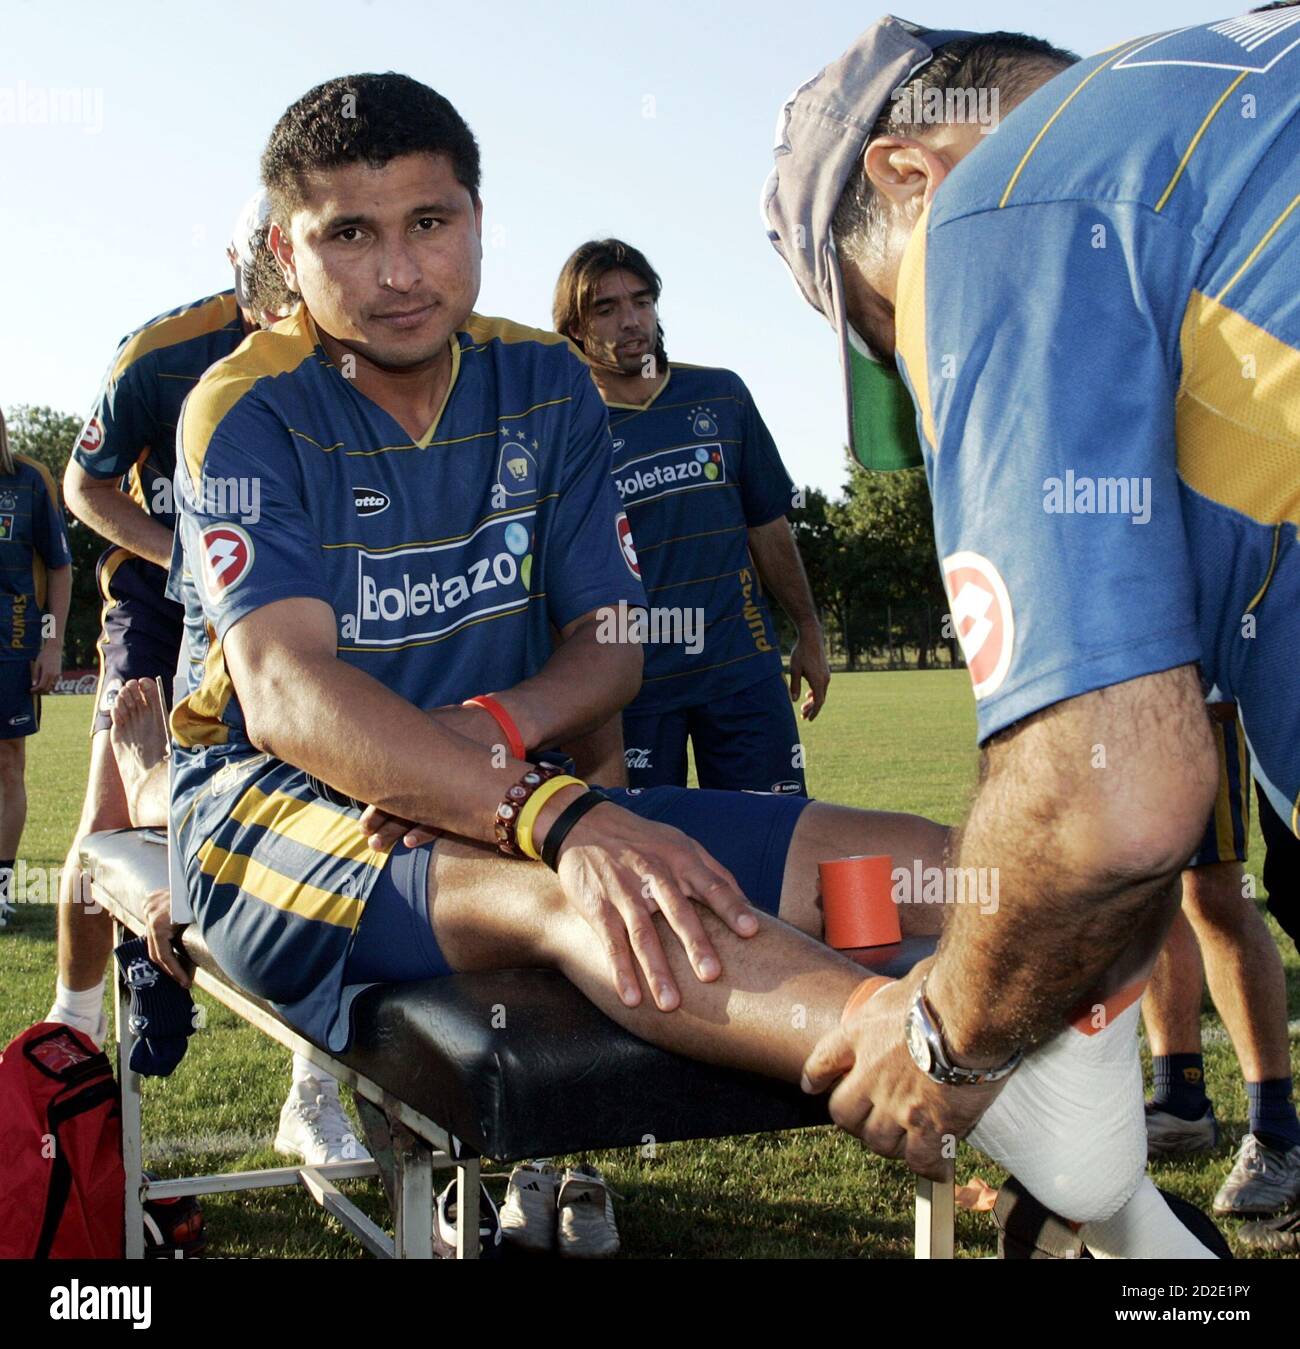 Joaquin Botero of the Mexican soccer team Pumas of Unam has his feet  bandaged before a warm up session with his team in Buenos Aires December  16, 2005. Pumas of Unam faces